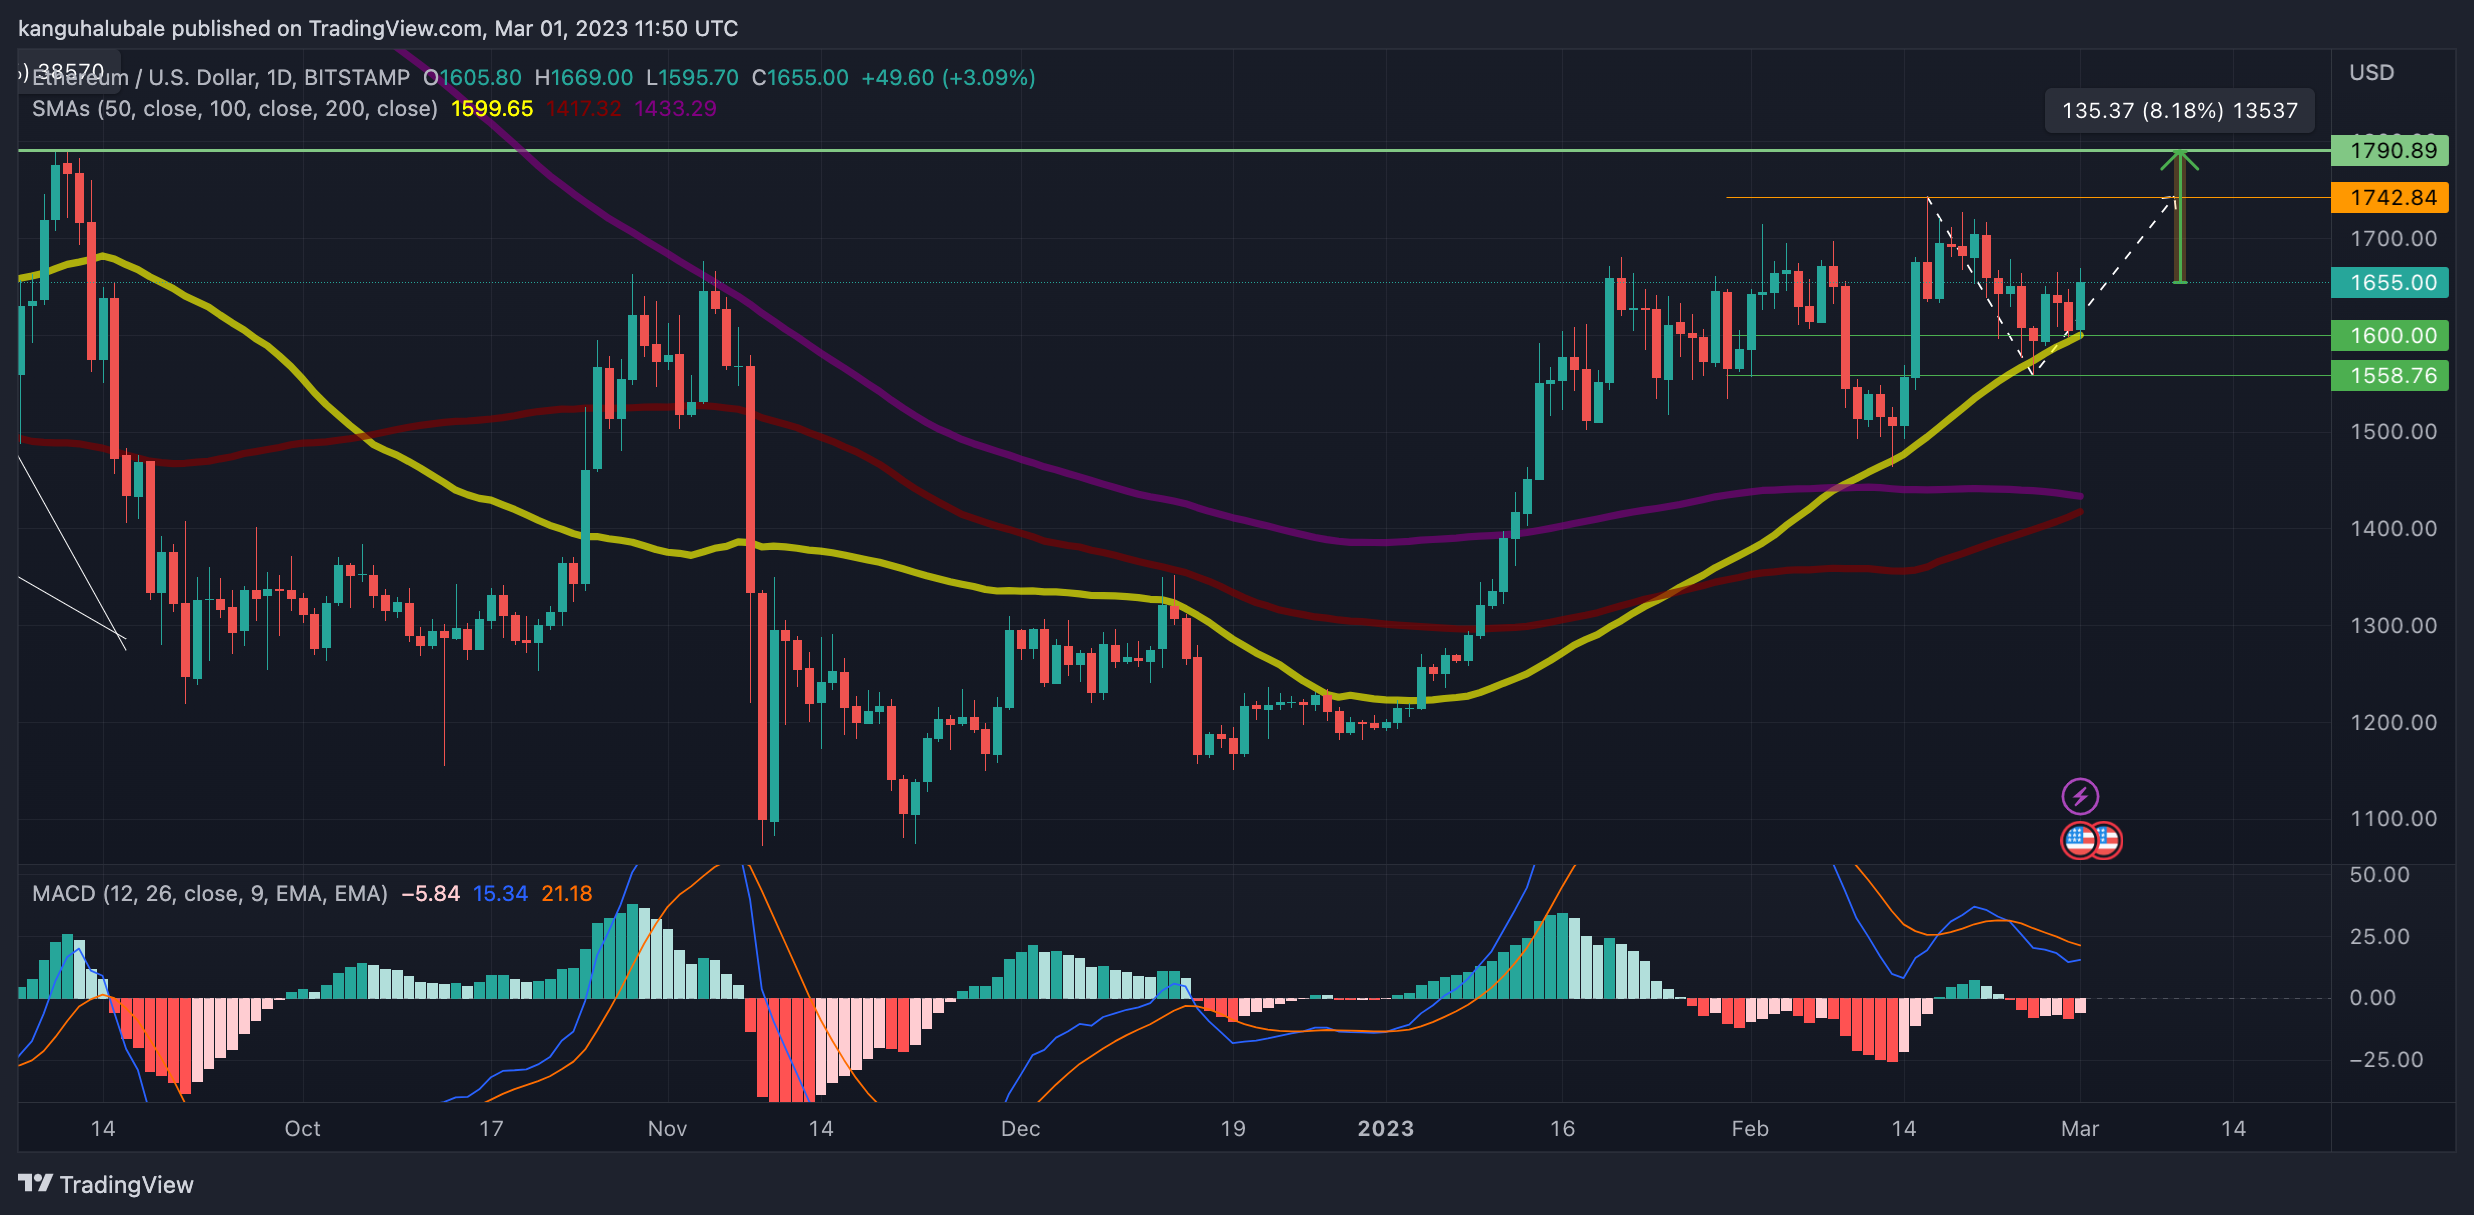 Ethereum price chart - March 1